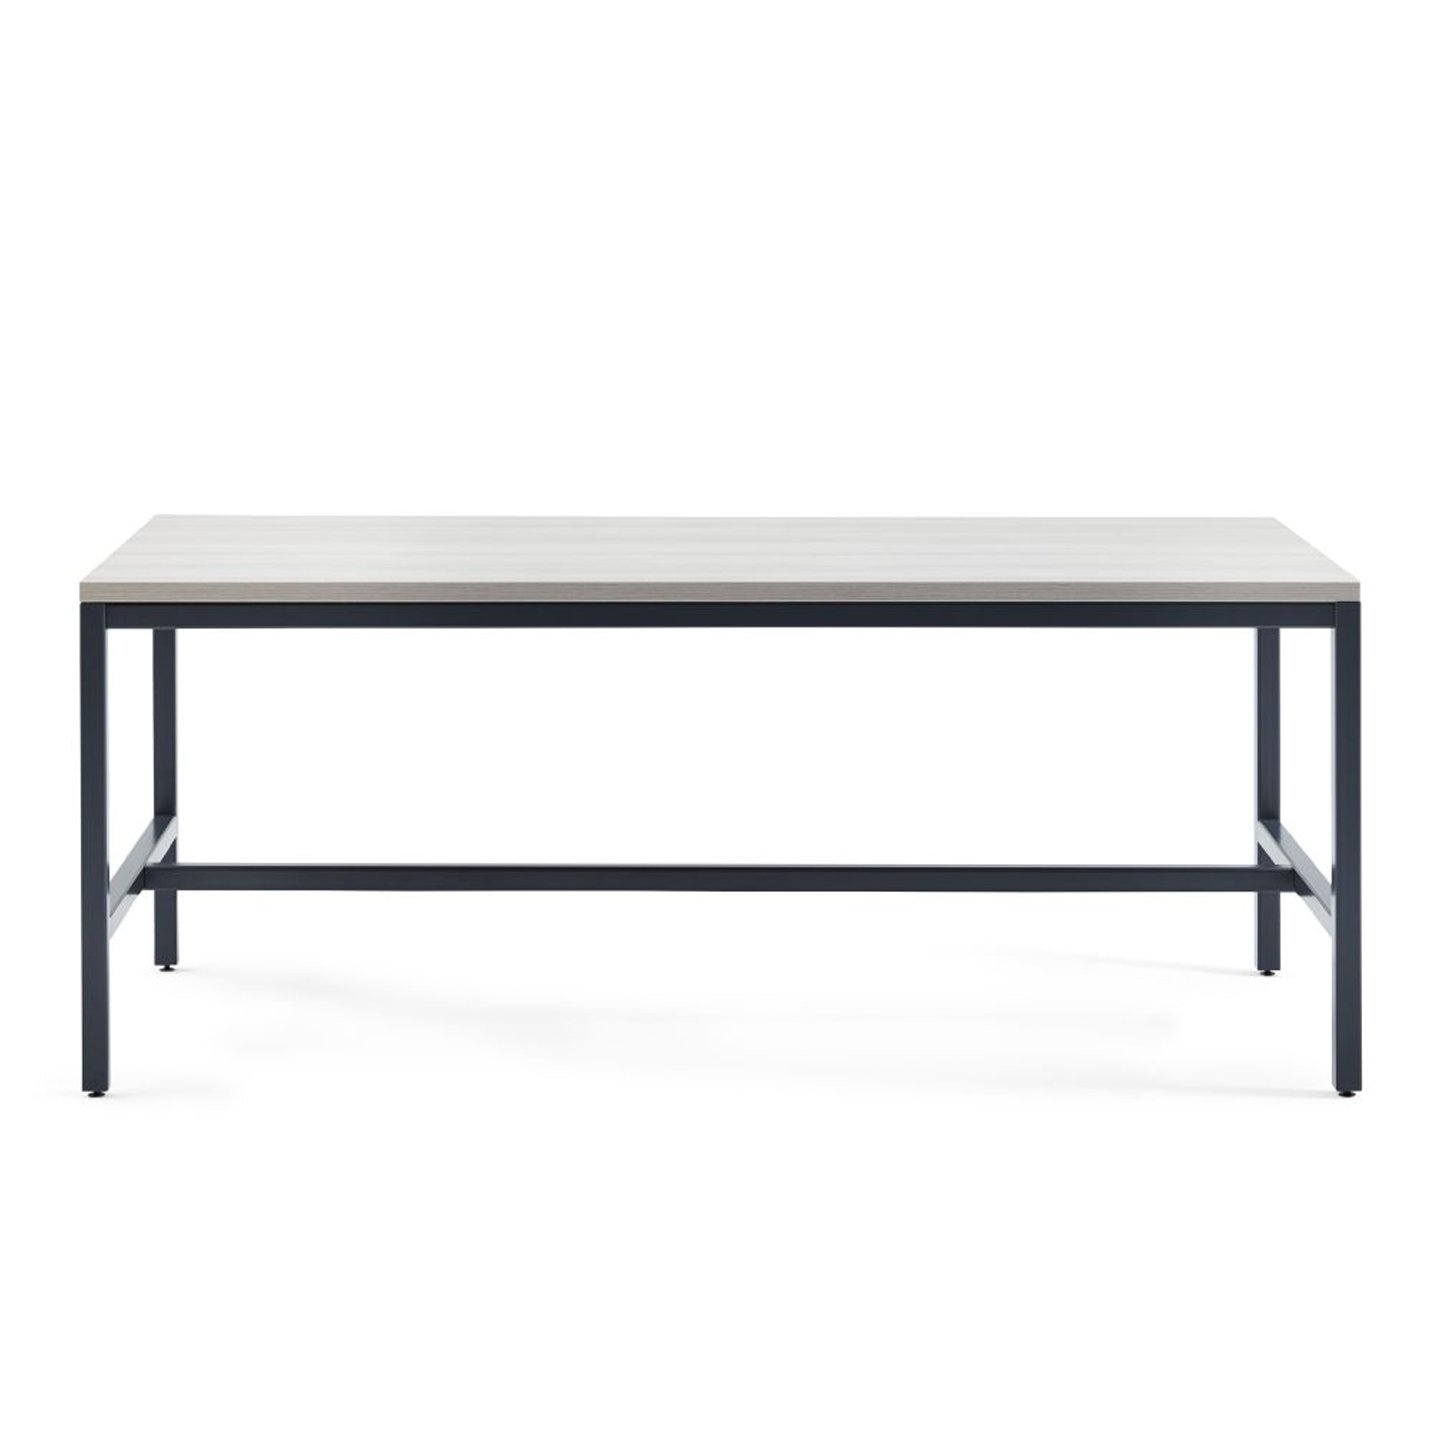 Haworth cultivate table with 4 metal black legs and laminate finish 